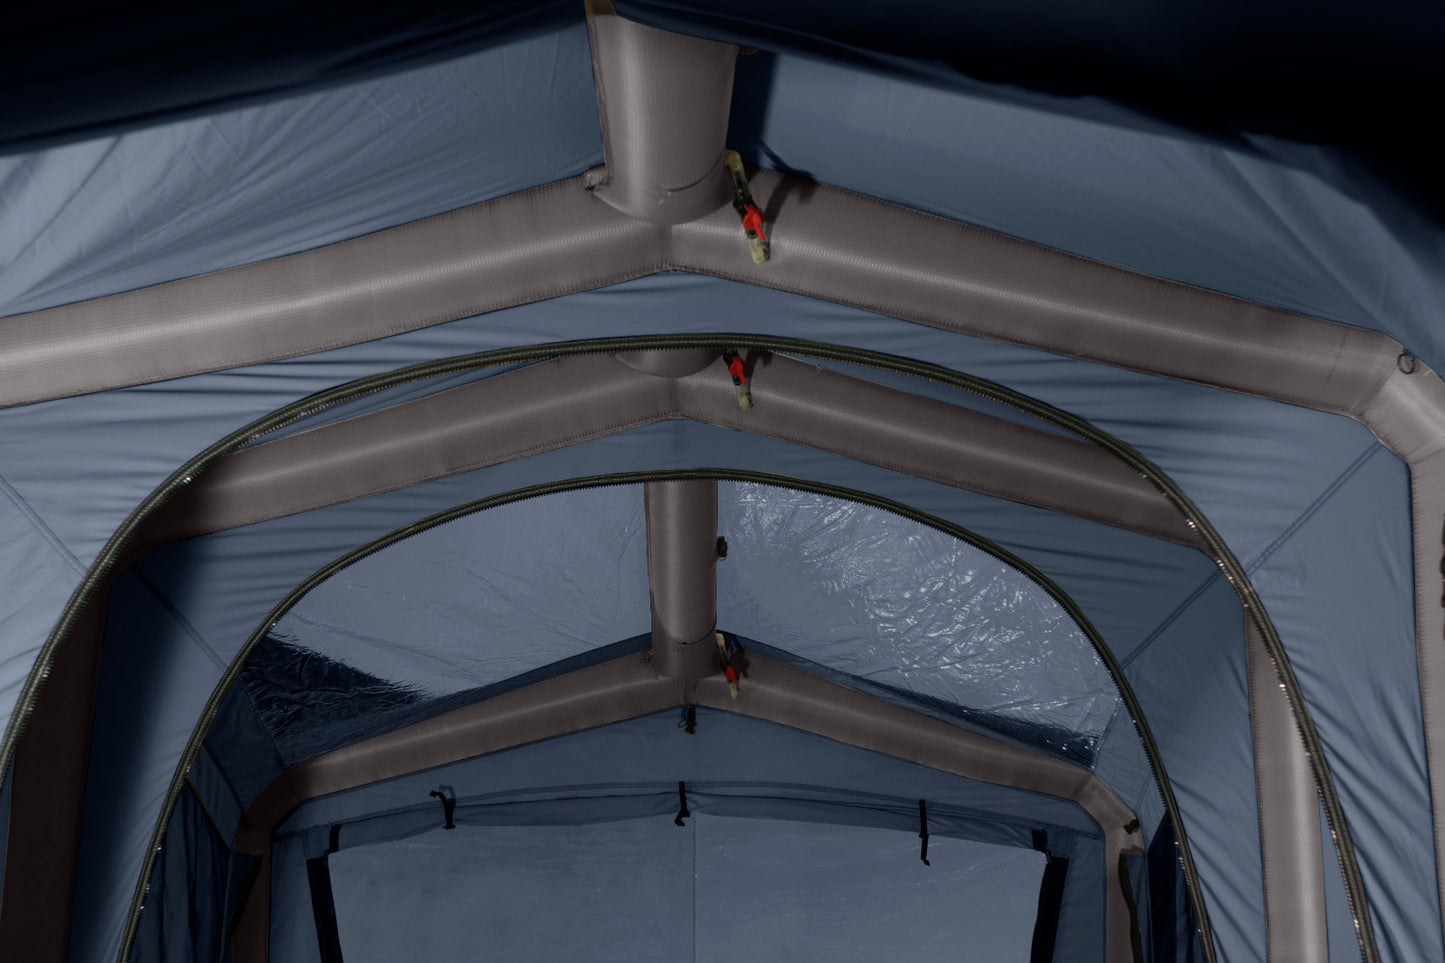 Interior view with a close up view of the inflatable frame and the air valves.